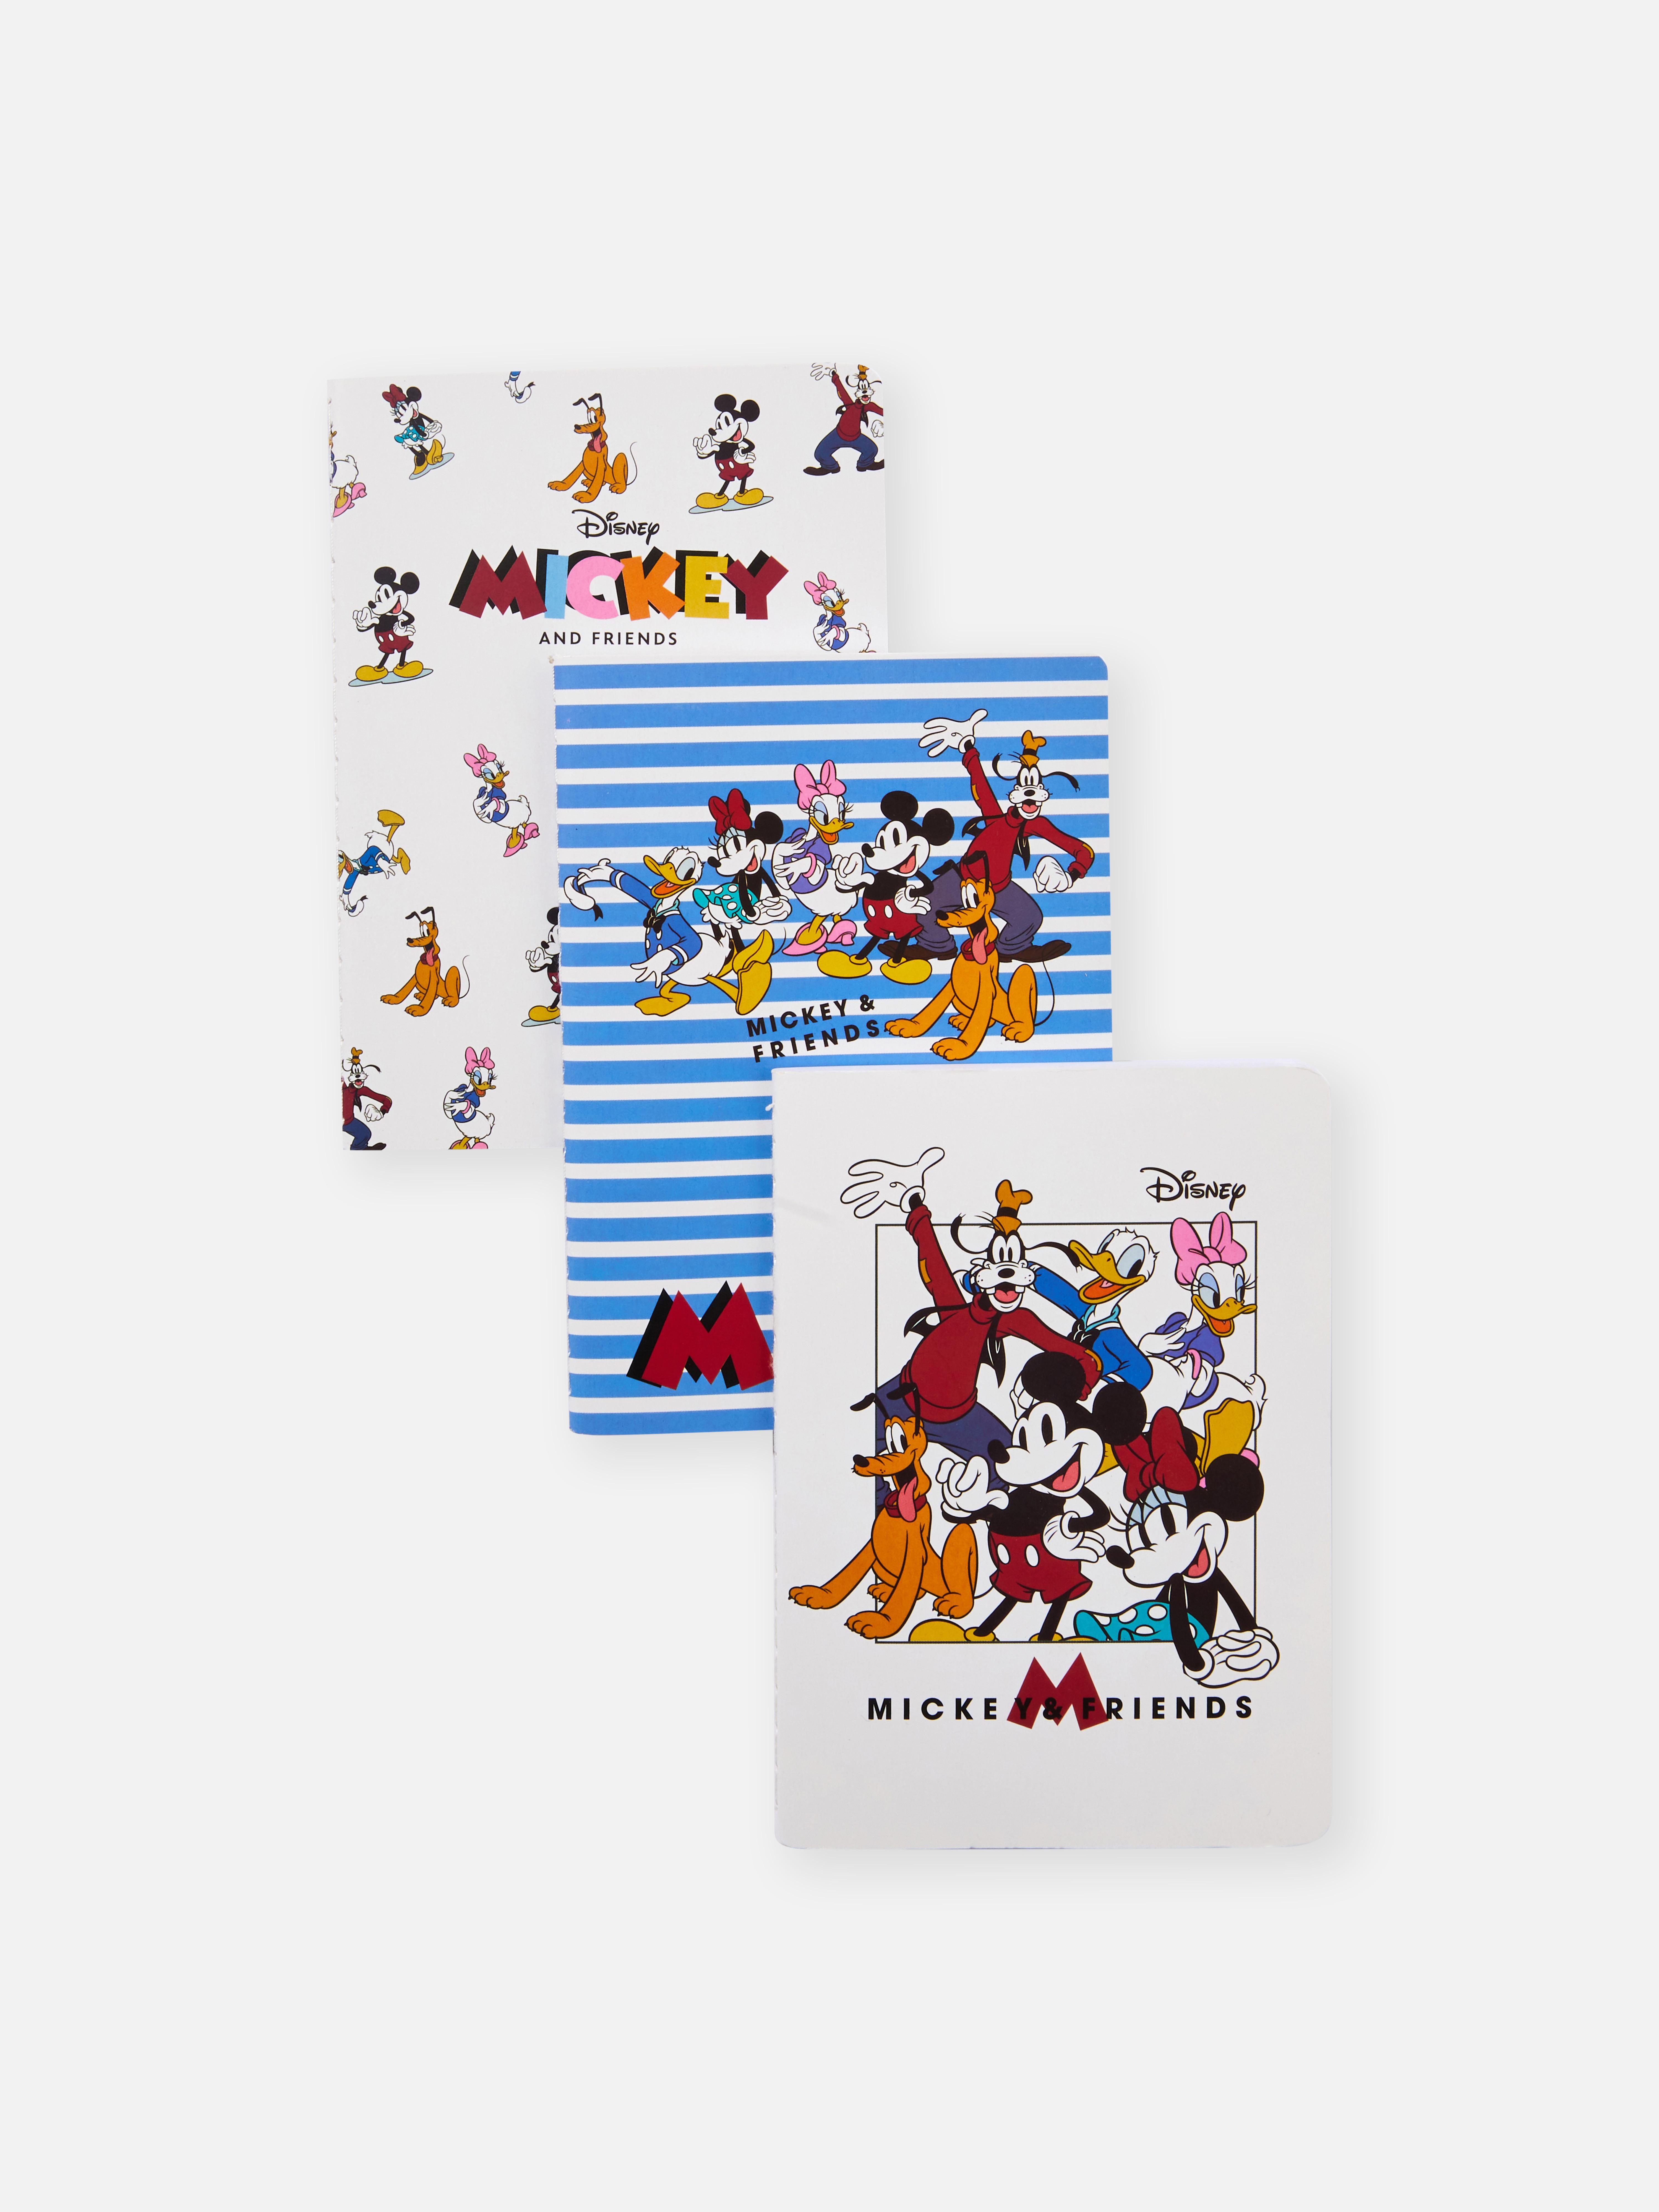 Disney's Mickey Mouse & Friends A6 Notebook Pack